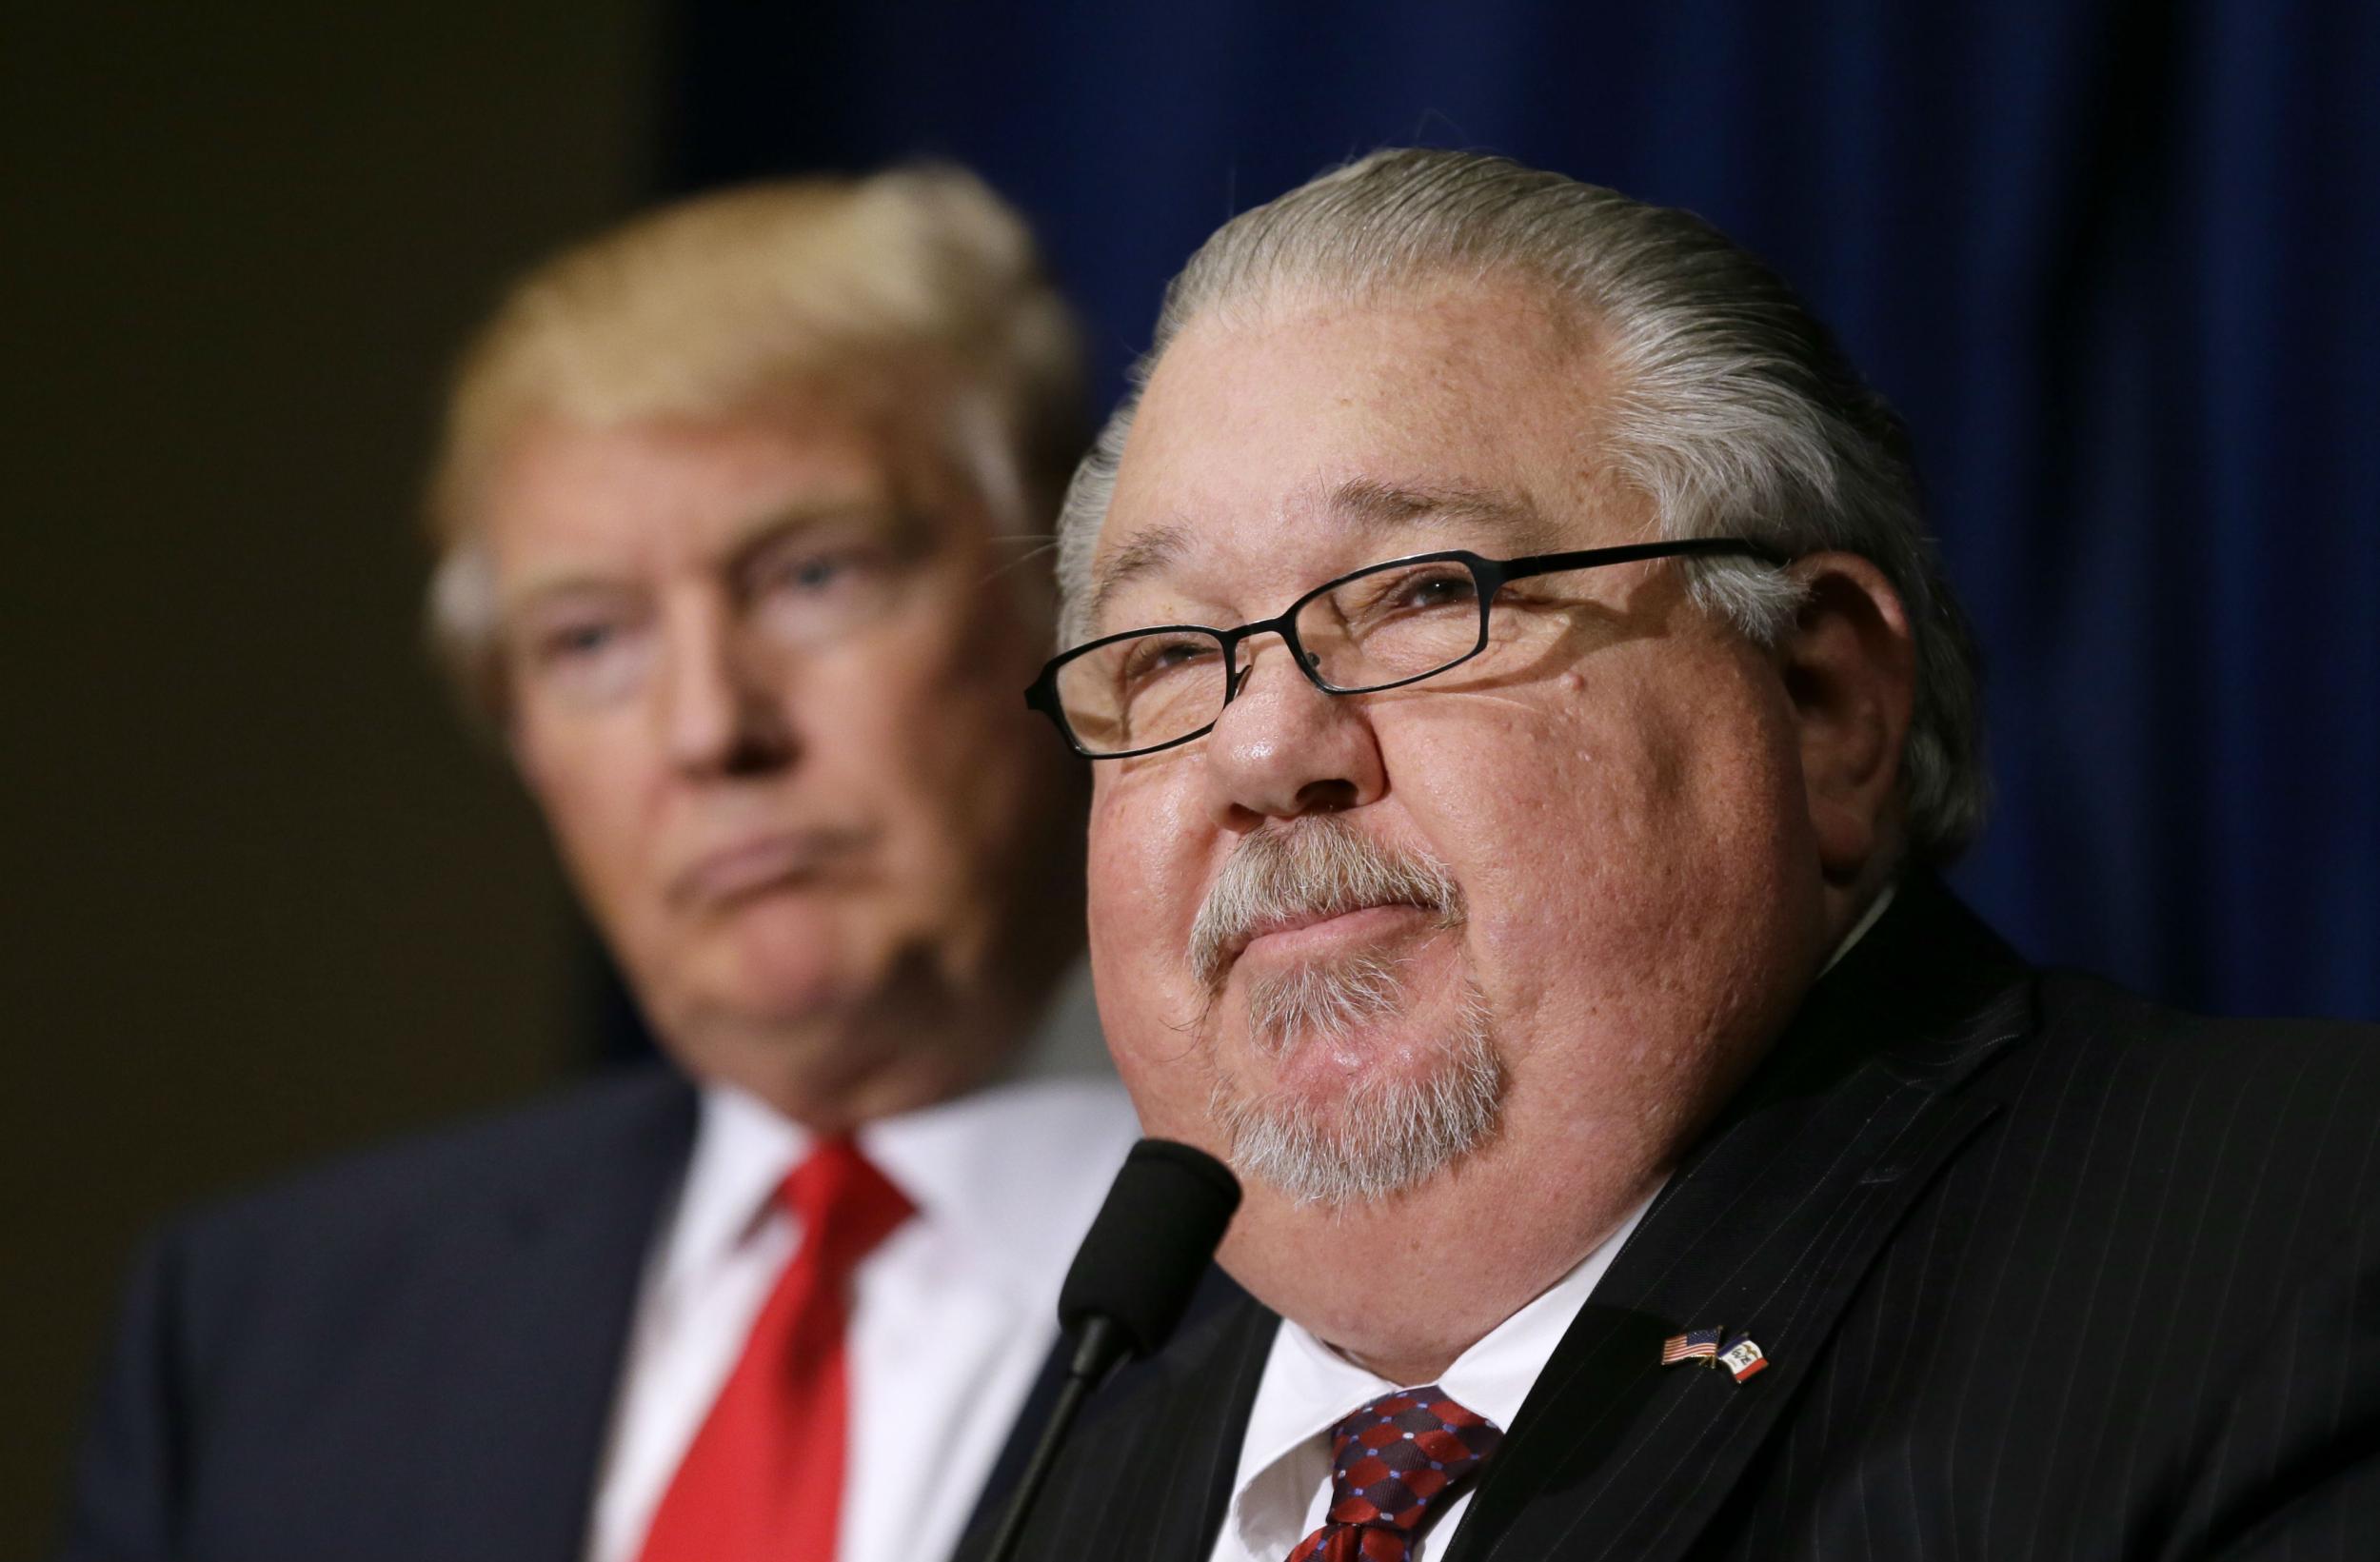 Sam Clovis was slated to be Trump’s chief scientist at the Department of Agriculture. He isn’t a scientist